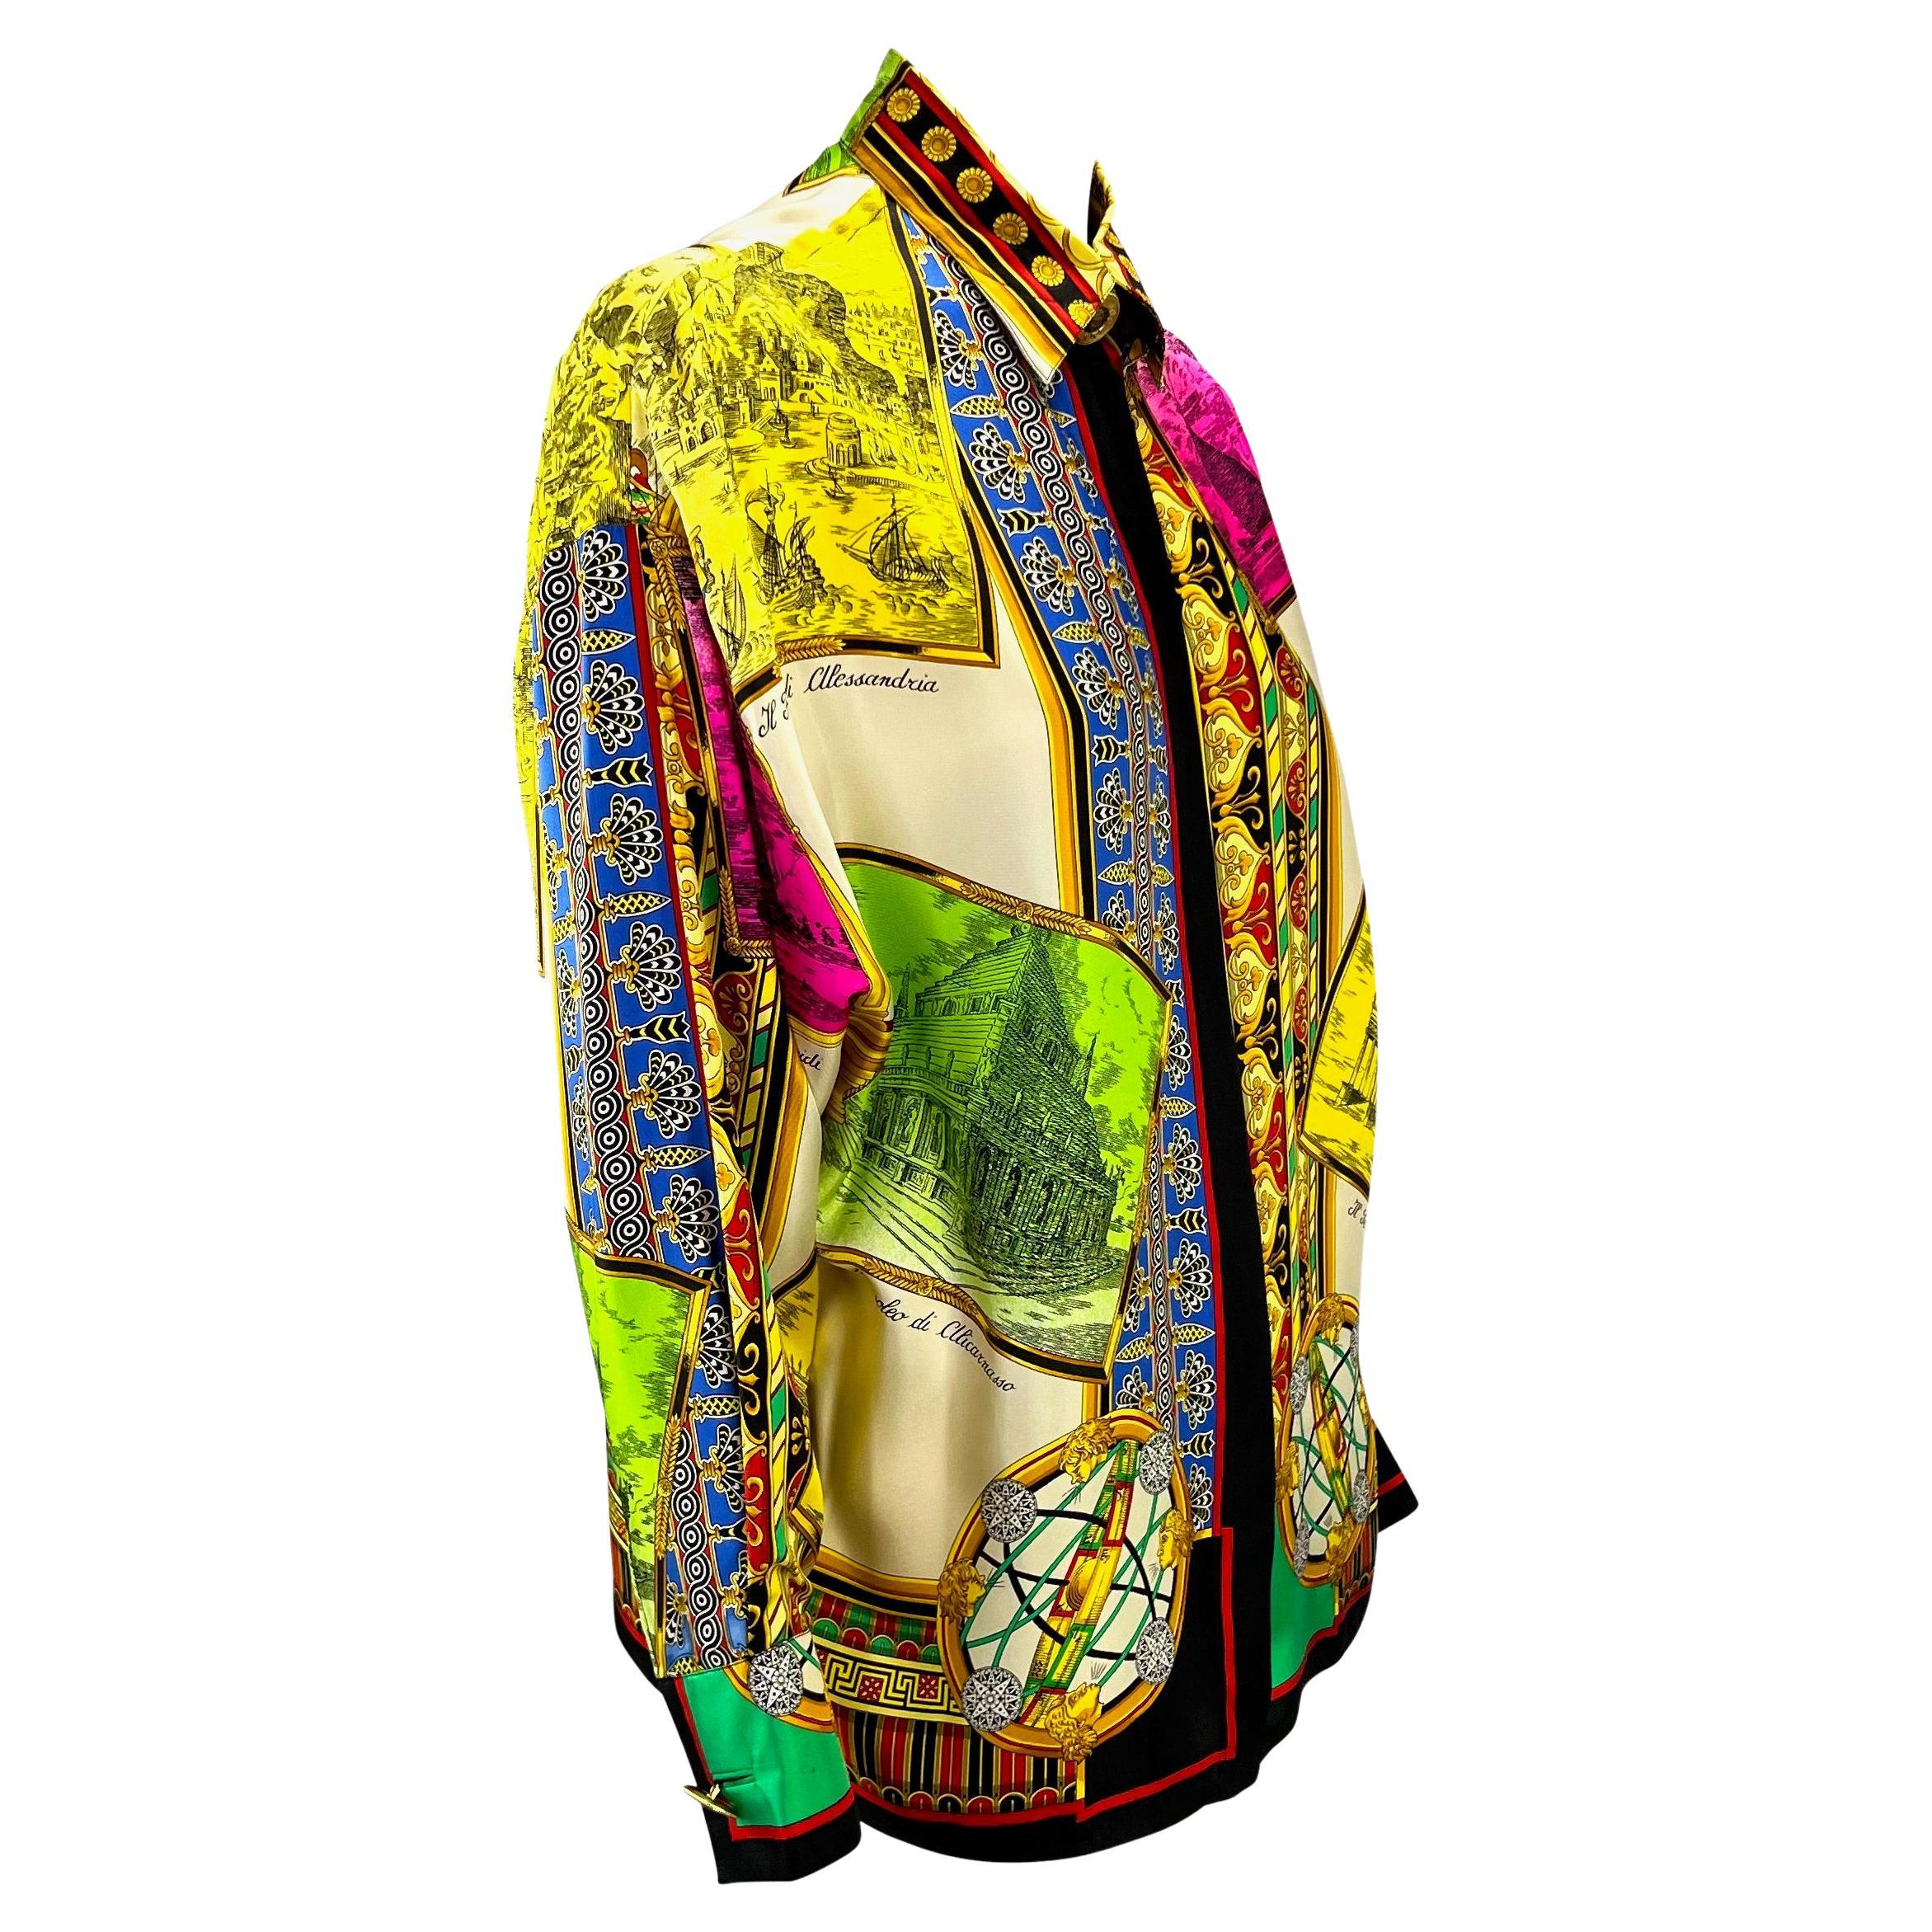 Women's S/S 1993 Gianni Versace Couture Printed Silk Medusa Medallion Button Down Top For Sale